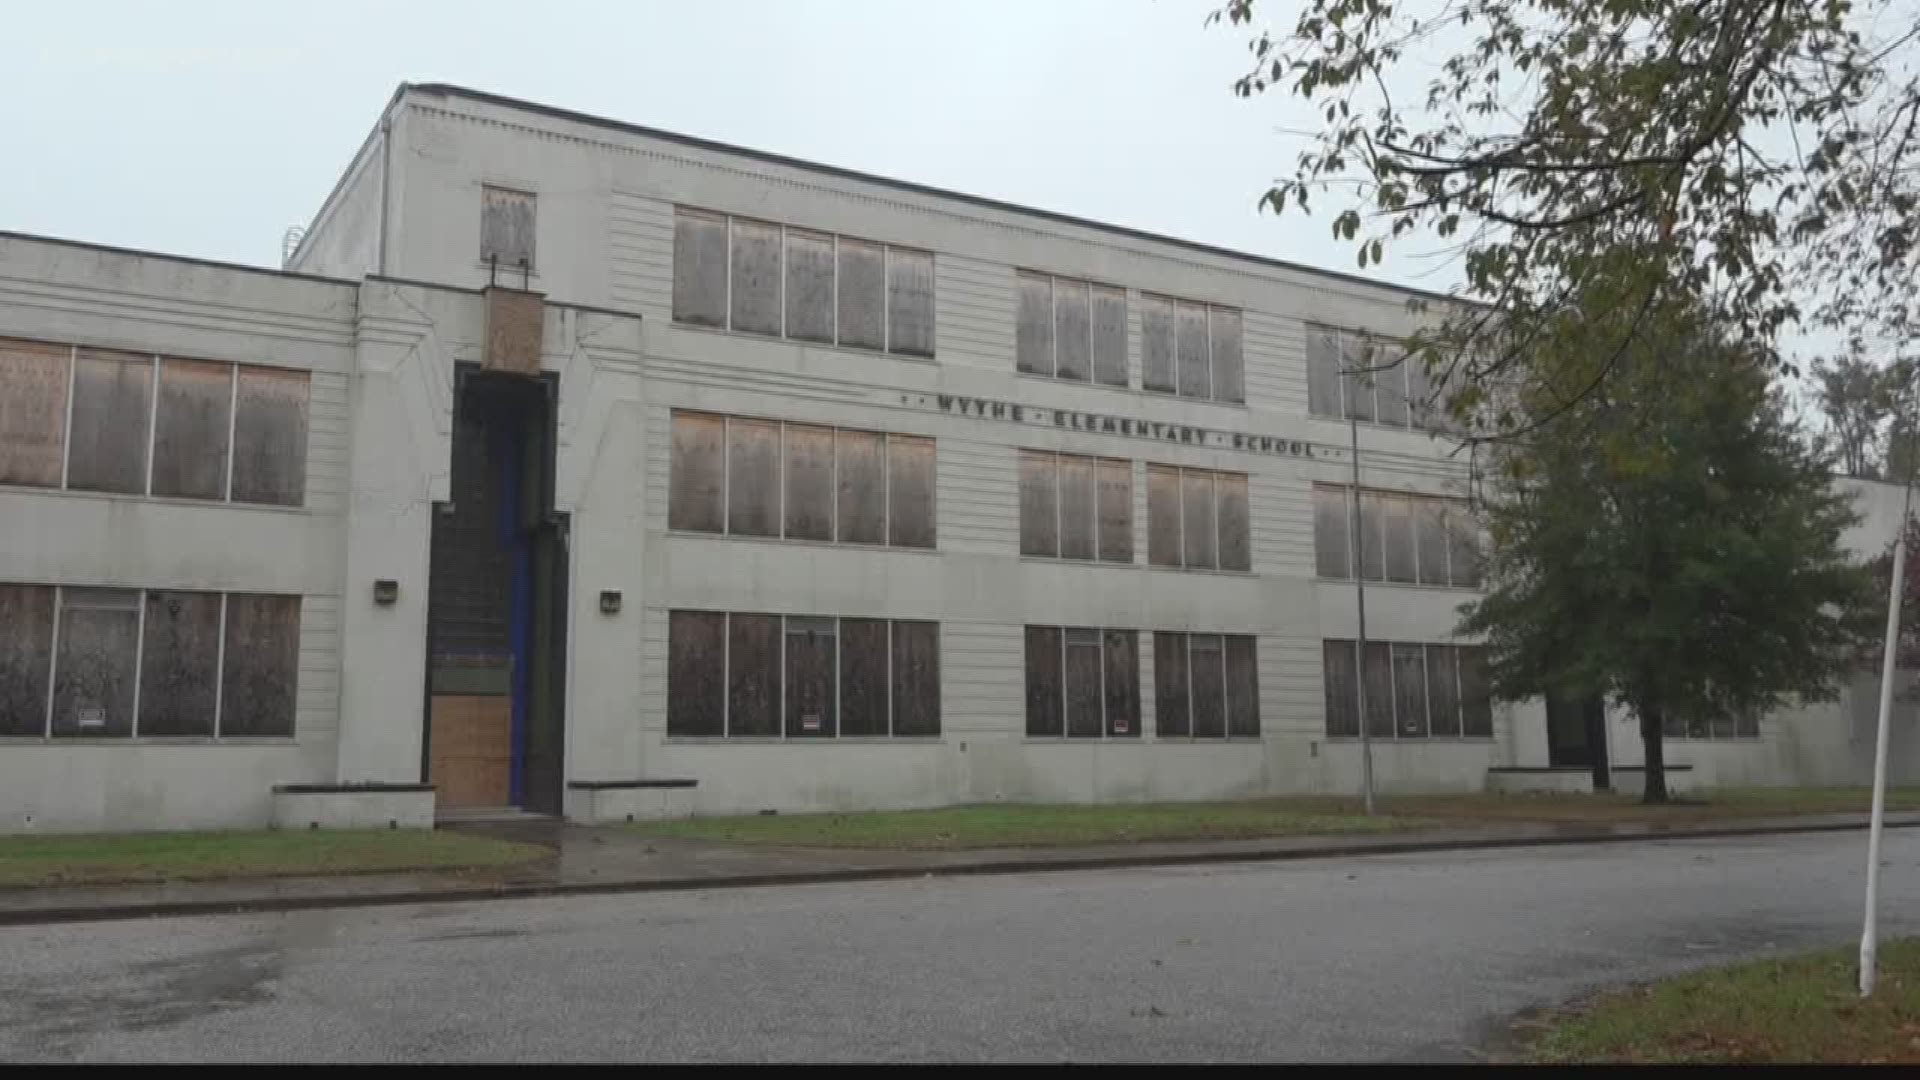 Developers now have city approval to transform Hampton's 'Wythe Elementary School' into apartments.